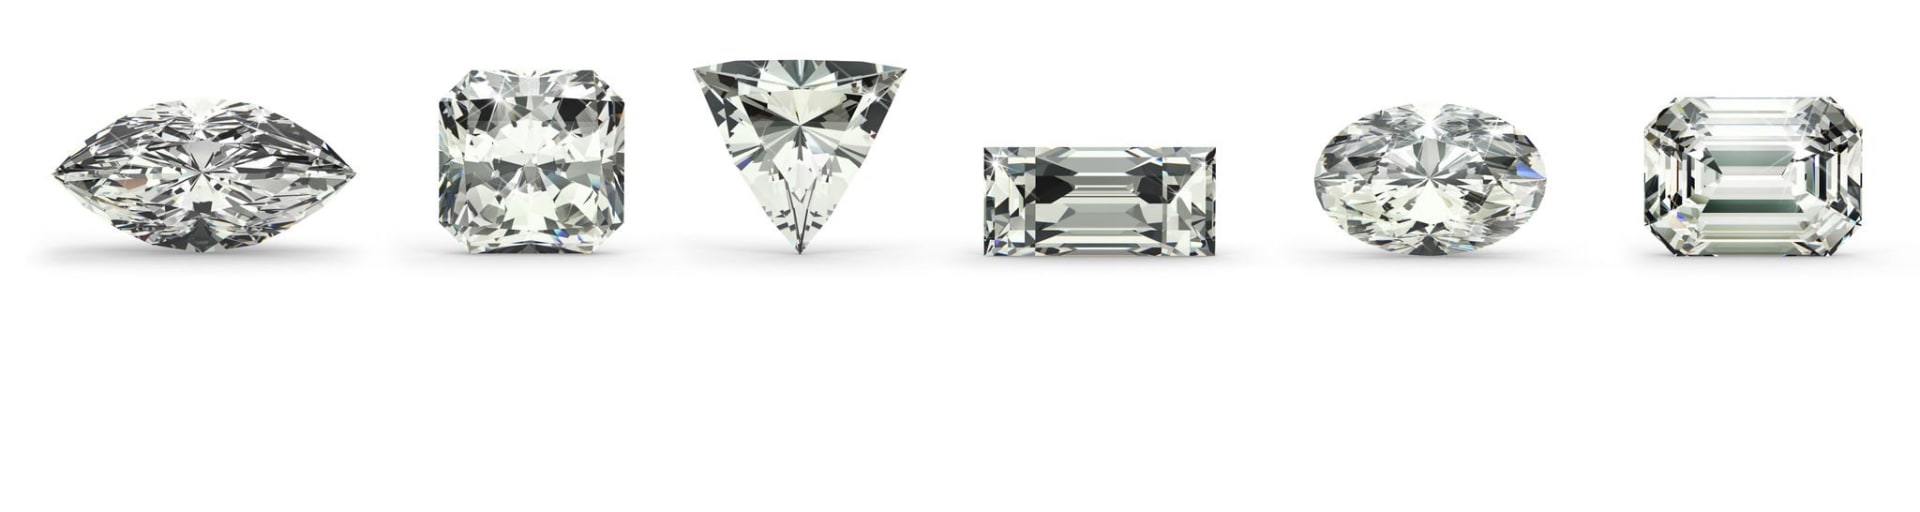 The Diamond Cut Scale: Your Guide to Choosing the Most Sparkly Diamond